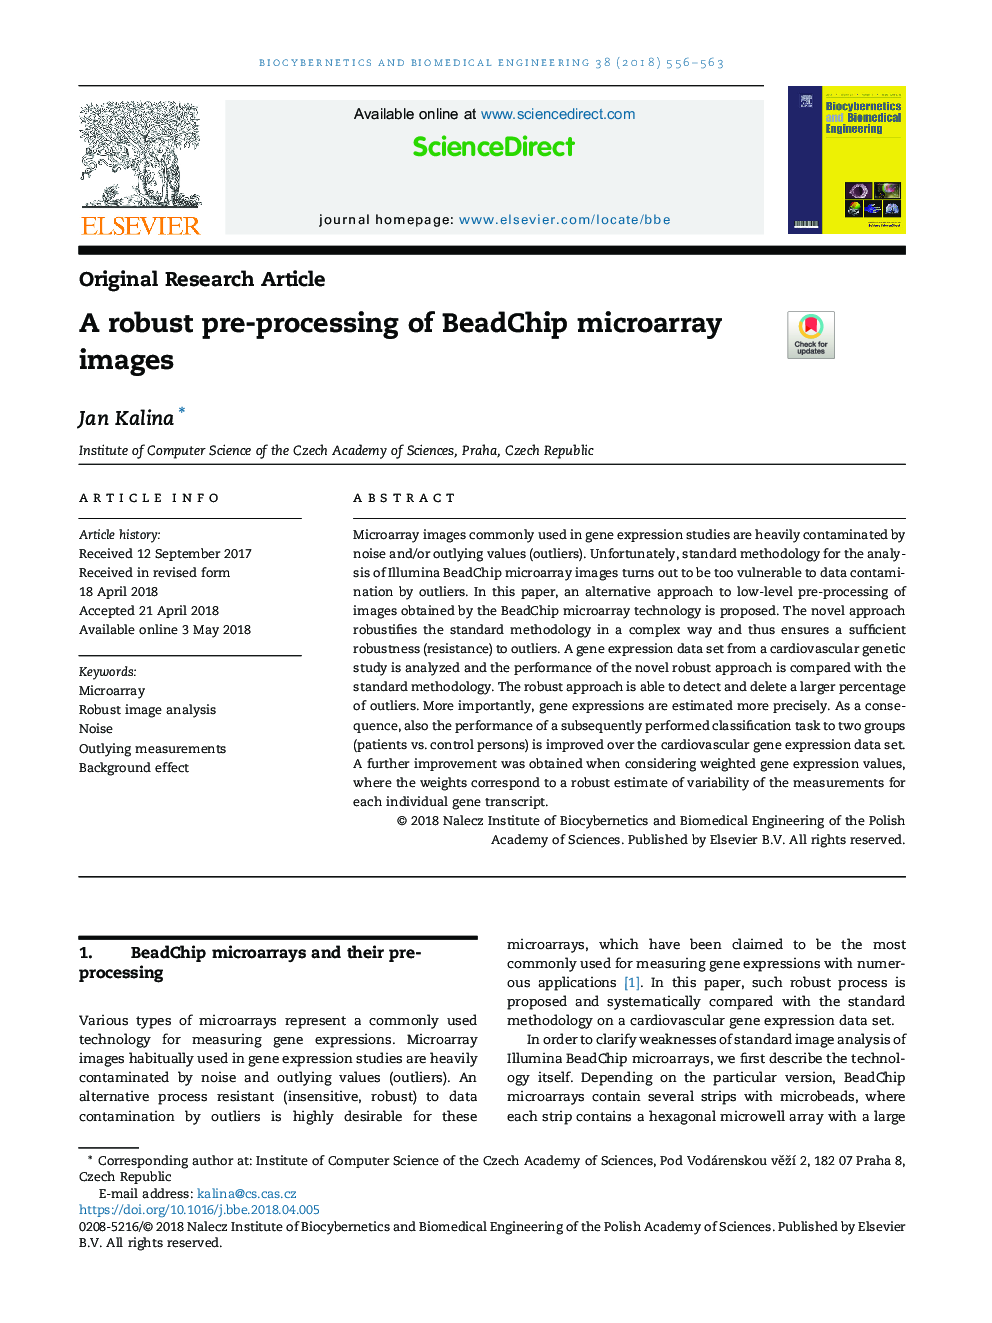 A robust pre-processing of BeadChip microarray images